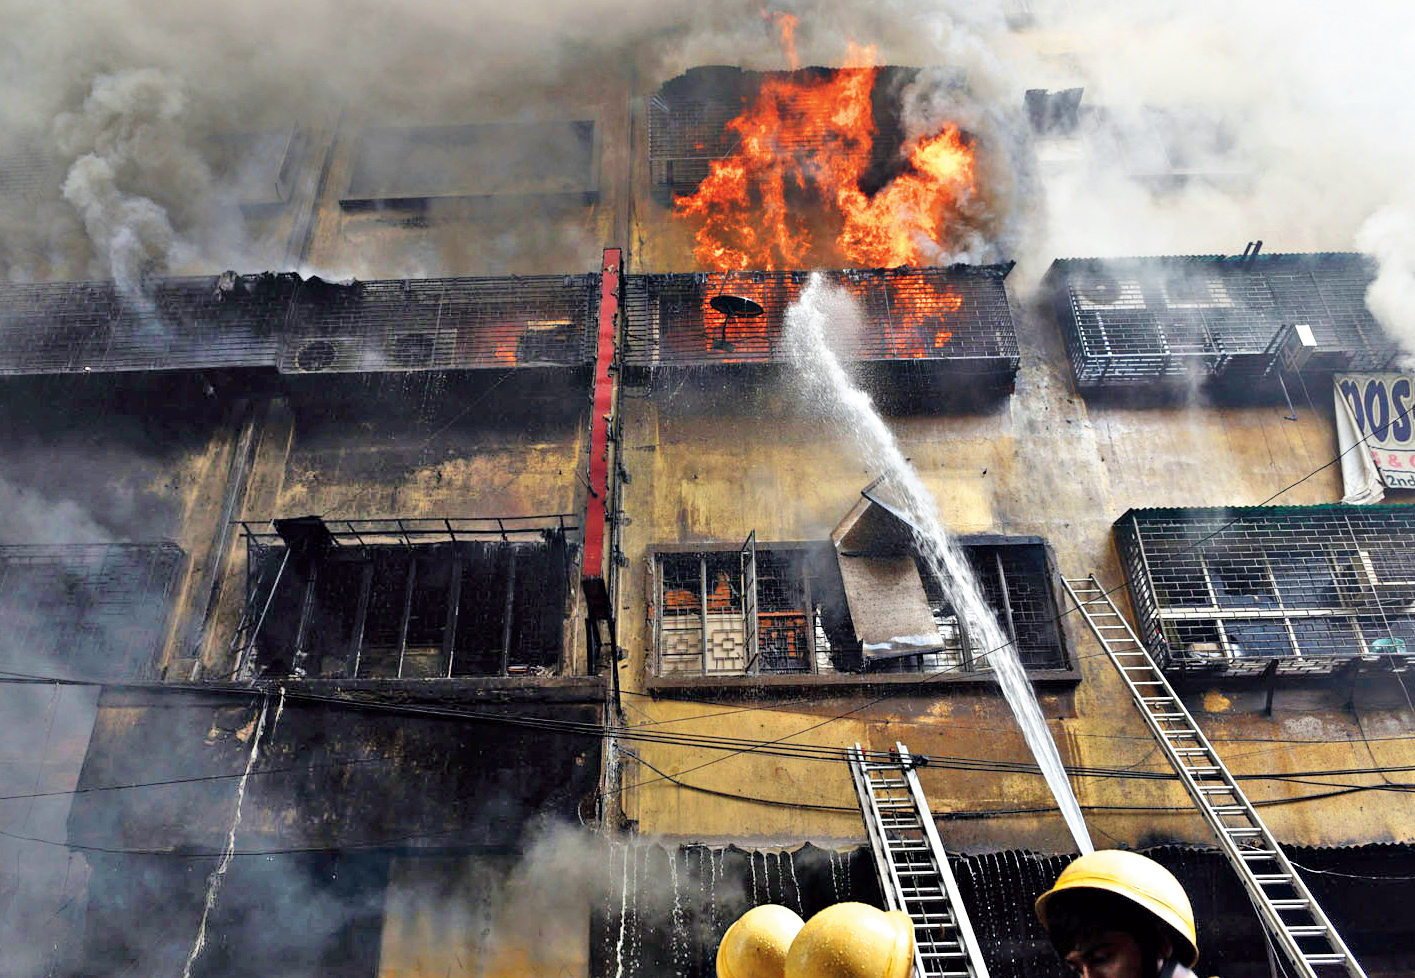 The fire at Bagree Market that had started on September 16